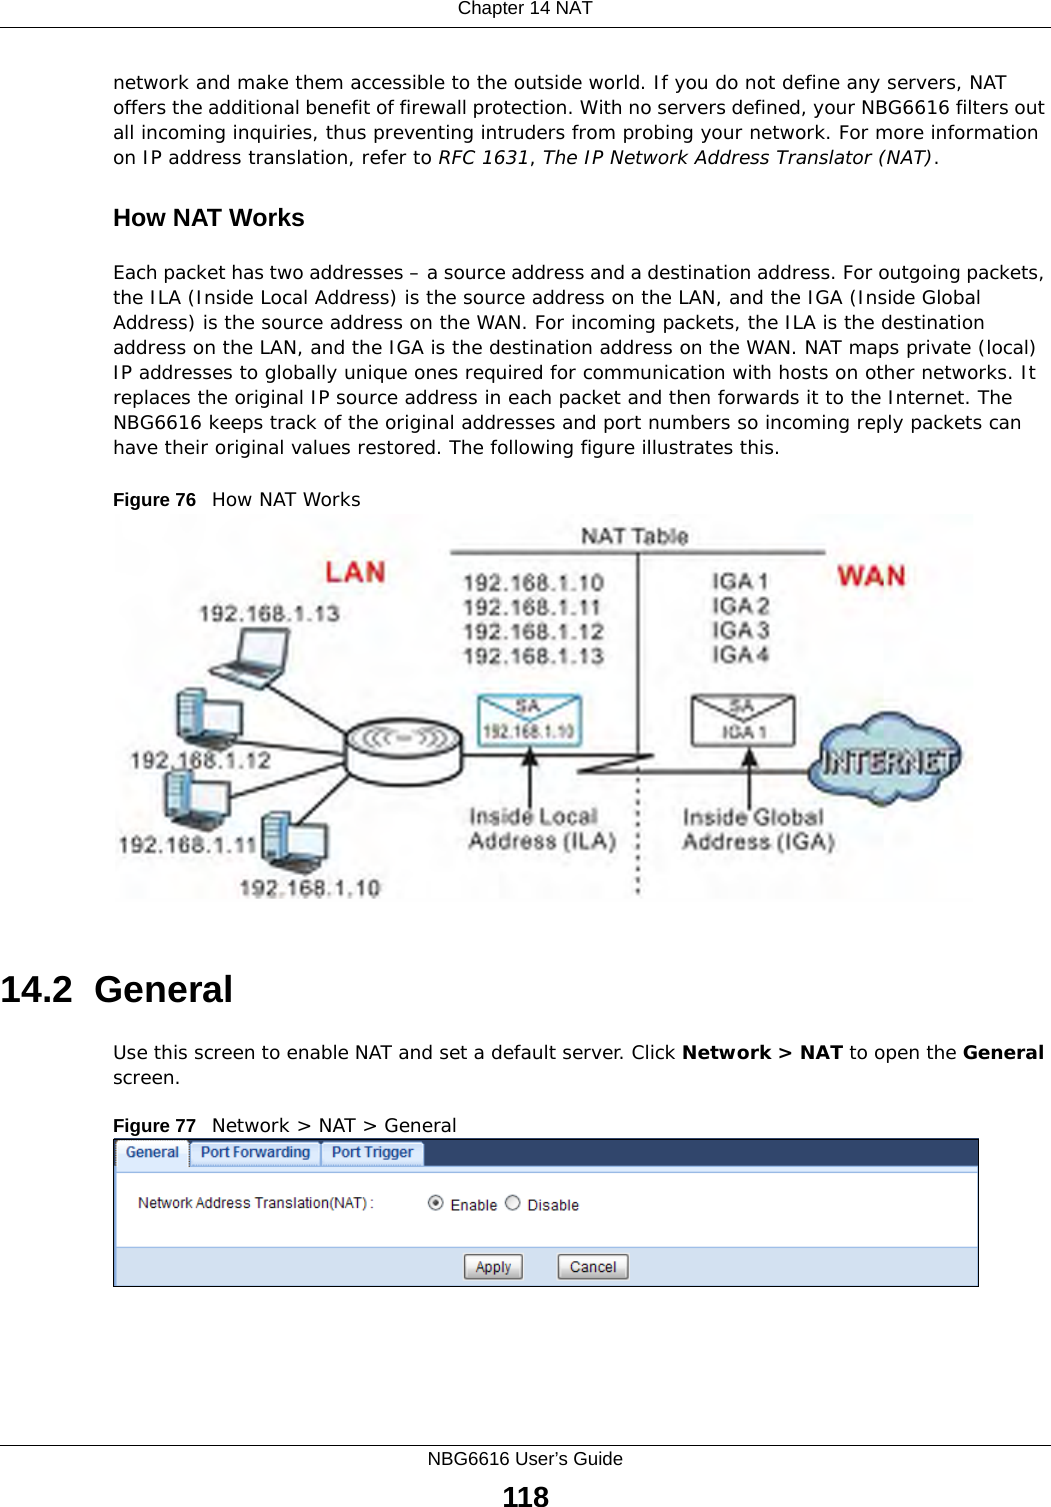 Chapter 14 NATNBG6616 User’s Guide118network and make them accessible to the outside world. If you do not define any servers, NAT offers the additional benefit of firewall protection. With no servers defined, your NBG6616 filters out all incoming inquiries, thus preventing intruders from probing your network. For more information on IP address translation, refer to RFC 1631, The IP Network Address Translator (NAT).How NAT WorksEach packet has two addresses – a source address and a destination address. For outgoing packets, the ILA (Inside Local Address) is the source address on the LAN, and the IGA (Inside Global Address) is the source address on the WAN. For incoming packets, the ILA is the destination address on the LAN, and the IGA is the destination address on the WAN. NAT maps private (local) IP addresses to globally unique ones required for communication with hosts on other networks. It replaces the original IP source address in each packet and then forwards it to the Internet. The NBG6616 keeps track of the original addresses and port numbers so incoming reply packets can have their original values restored. The following figure illustrates this.Figure 76   How NAT Works14.2  GeneralUse this screen to enable NAT and set a default server. Click Network &gt; NAT to open the General screen.Figure 77   Network &gt; NAT &gt; General 